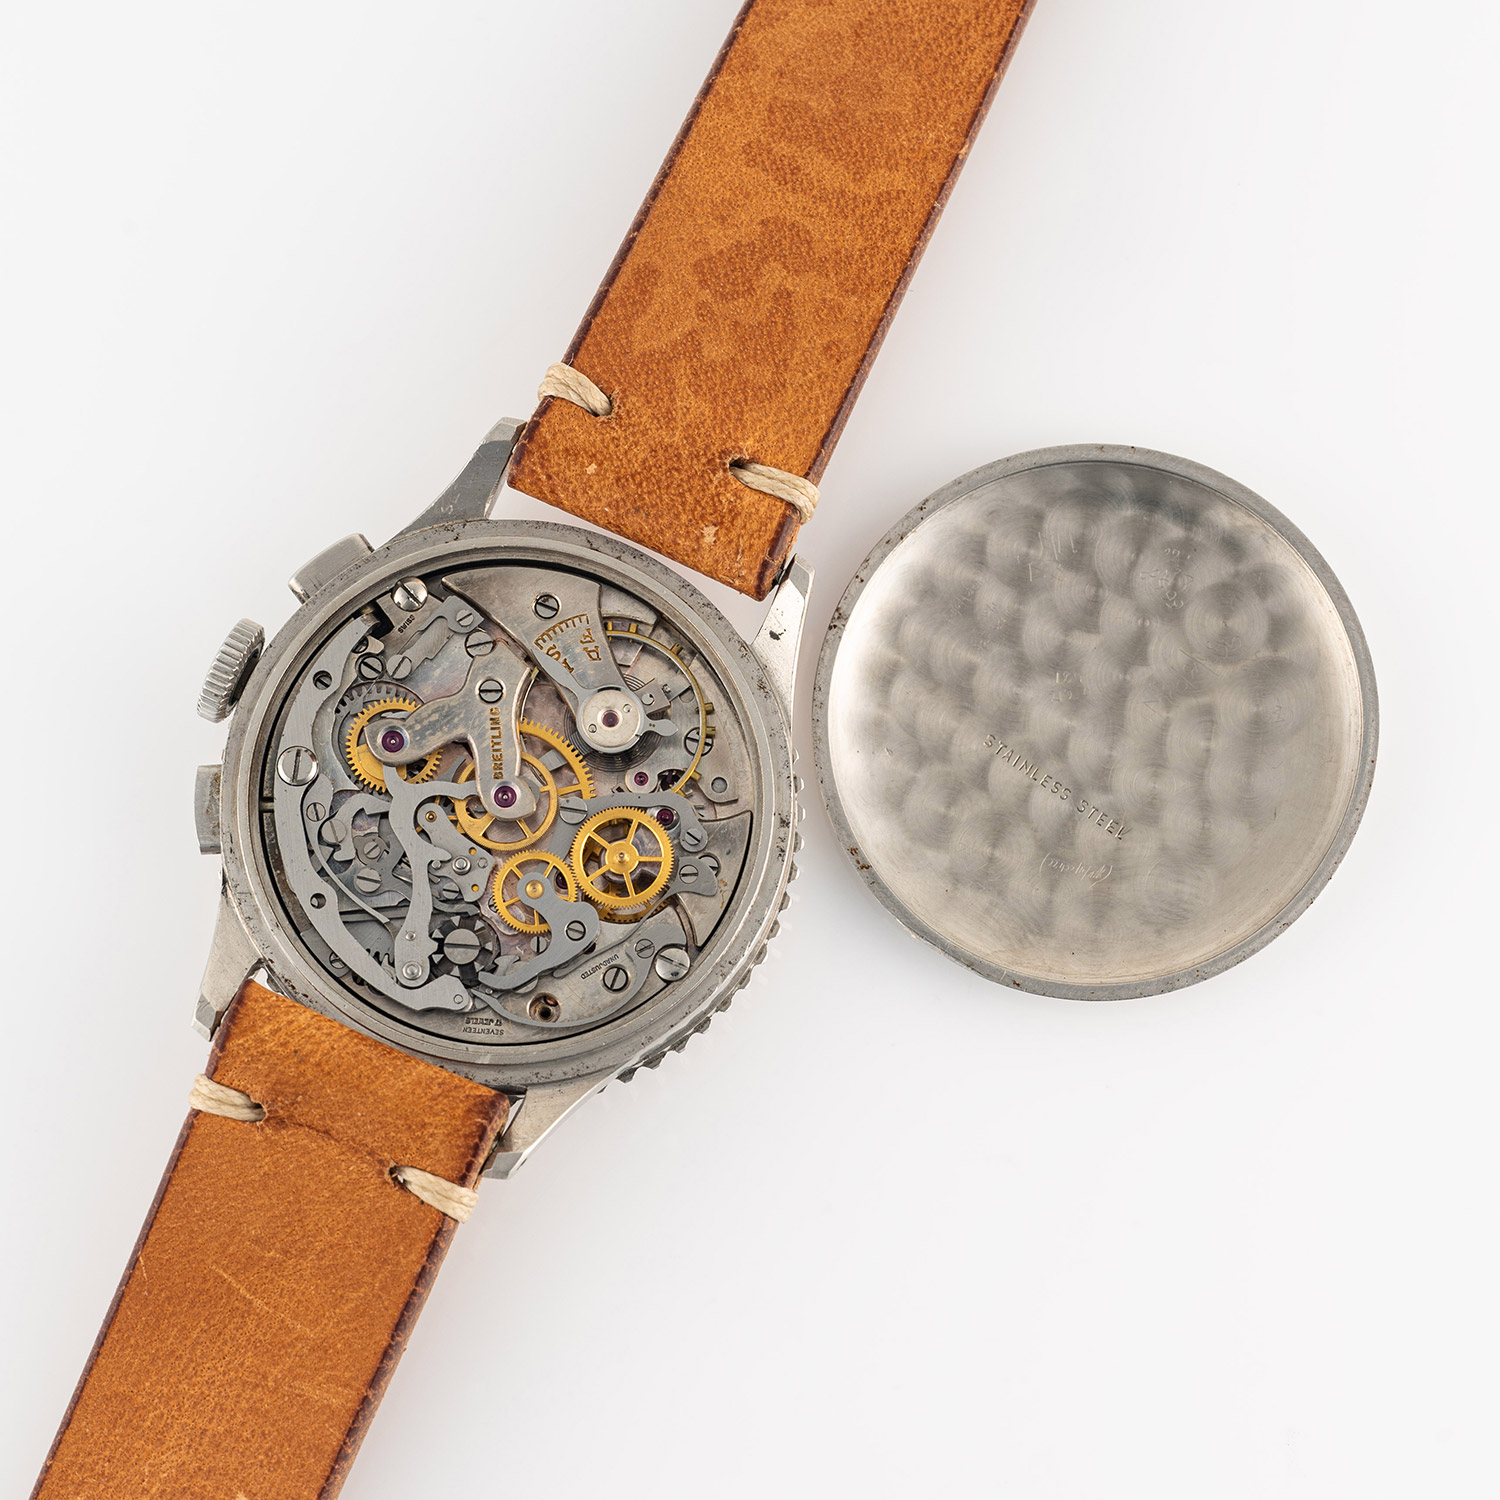 A GENTLEMAN'S SIZE STAINLESS STEEL BREITLING CHRONOMAT CHRONOGRAPH WRIST WATCH CIRCA 1945, REF. - Image 8 of 8